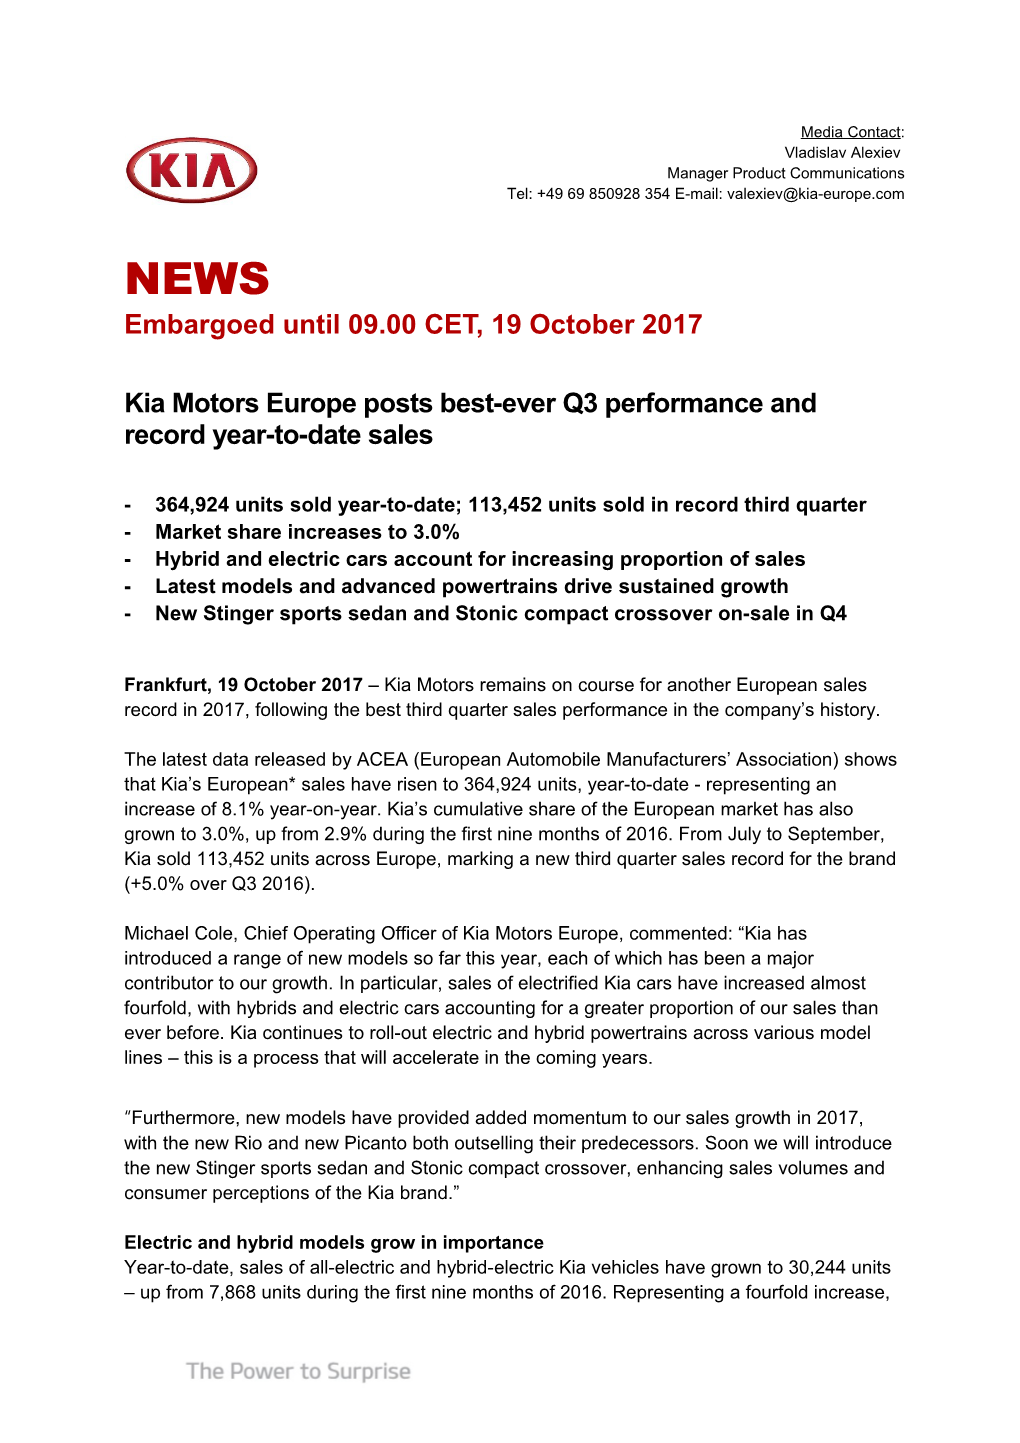 Kia Motors Europe Posts Best-Ever Q3 Performance and Record Year-To-Date Sales